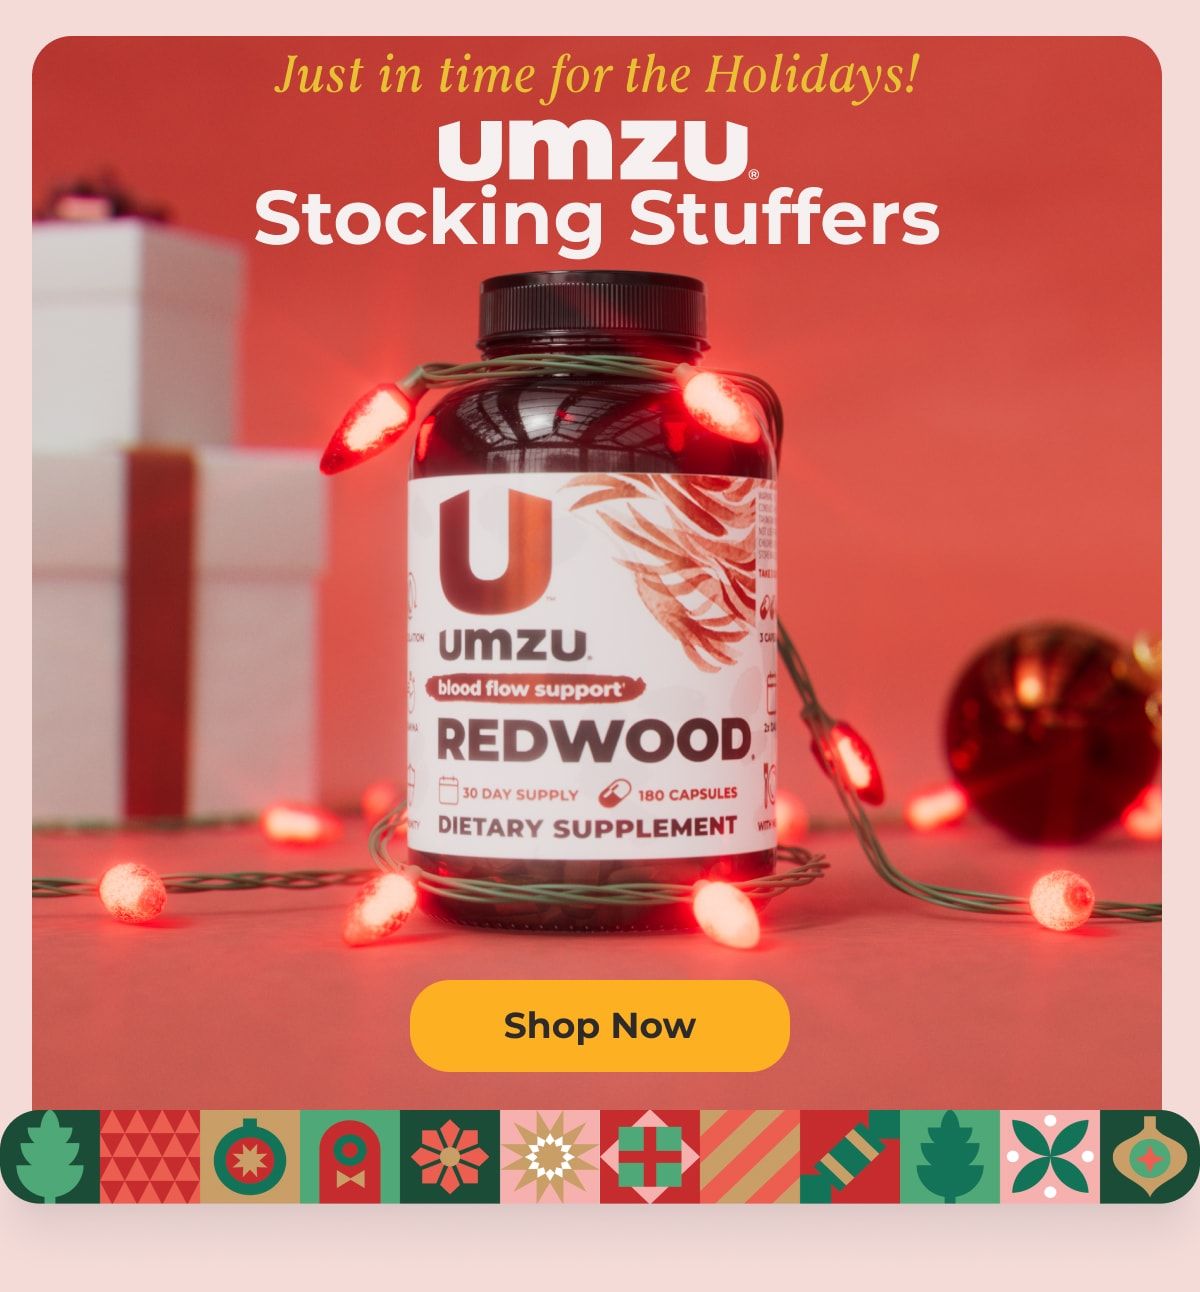 Just in time for the Holidays! UMZU Stocking Stuffers